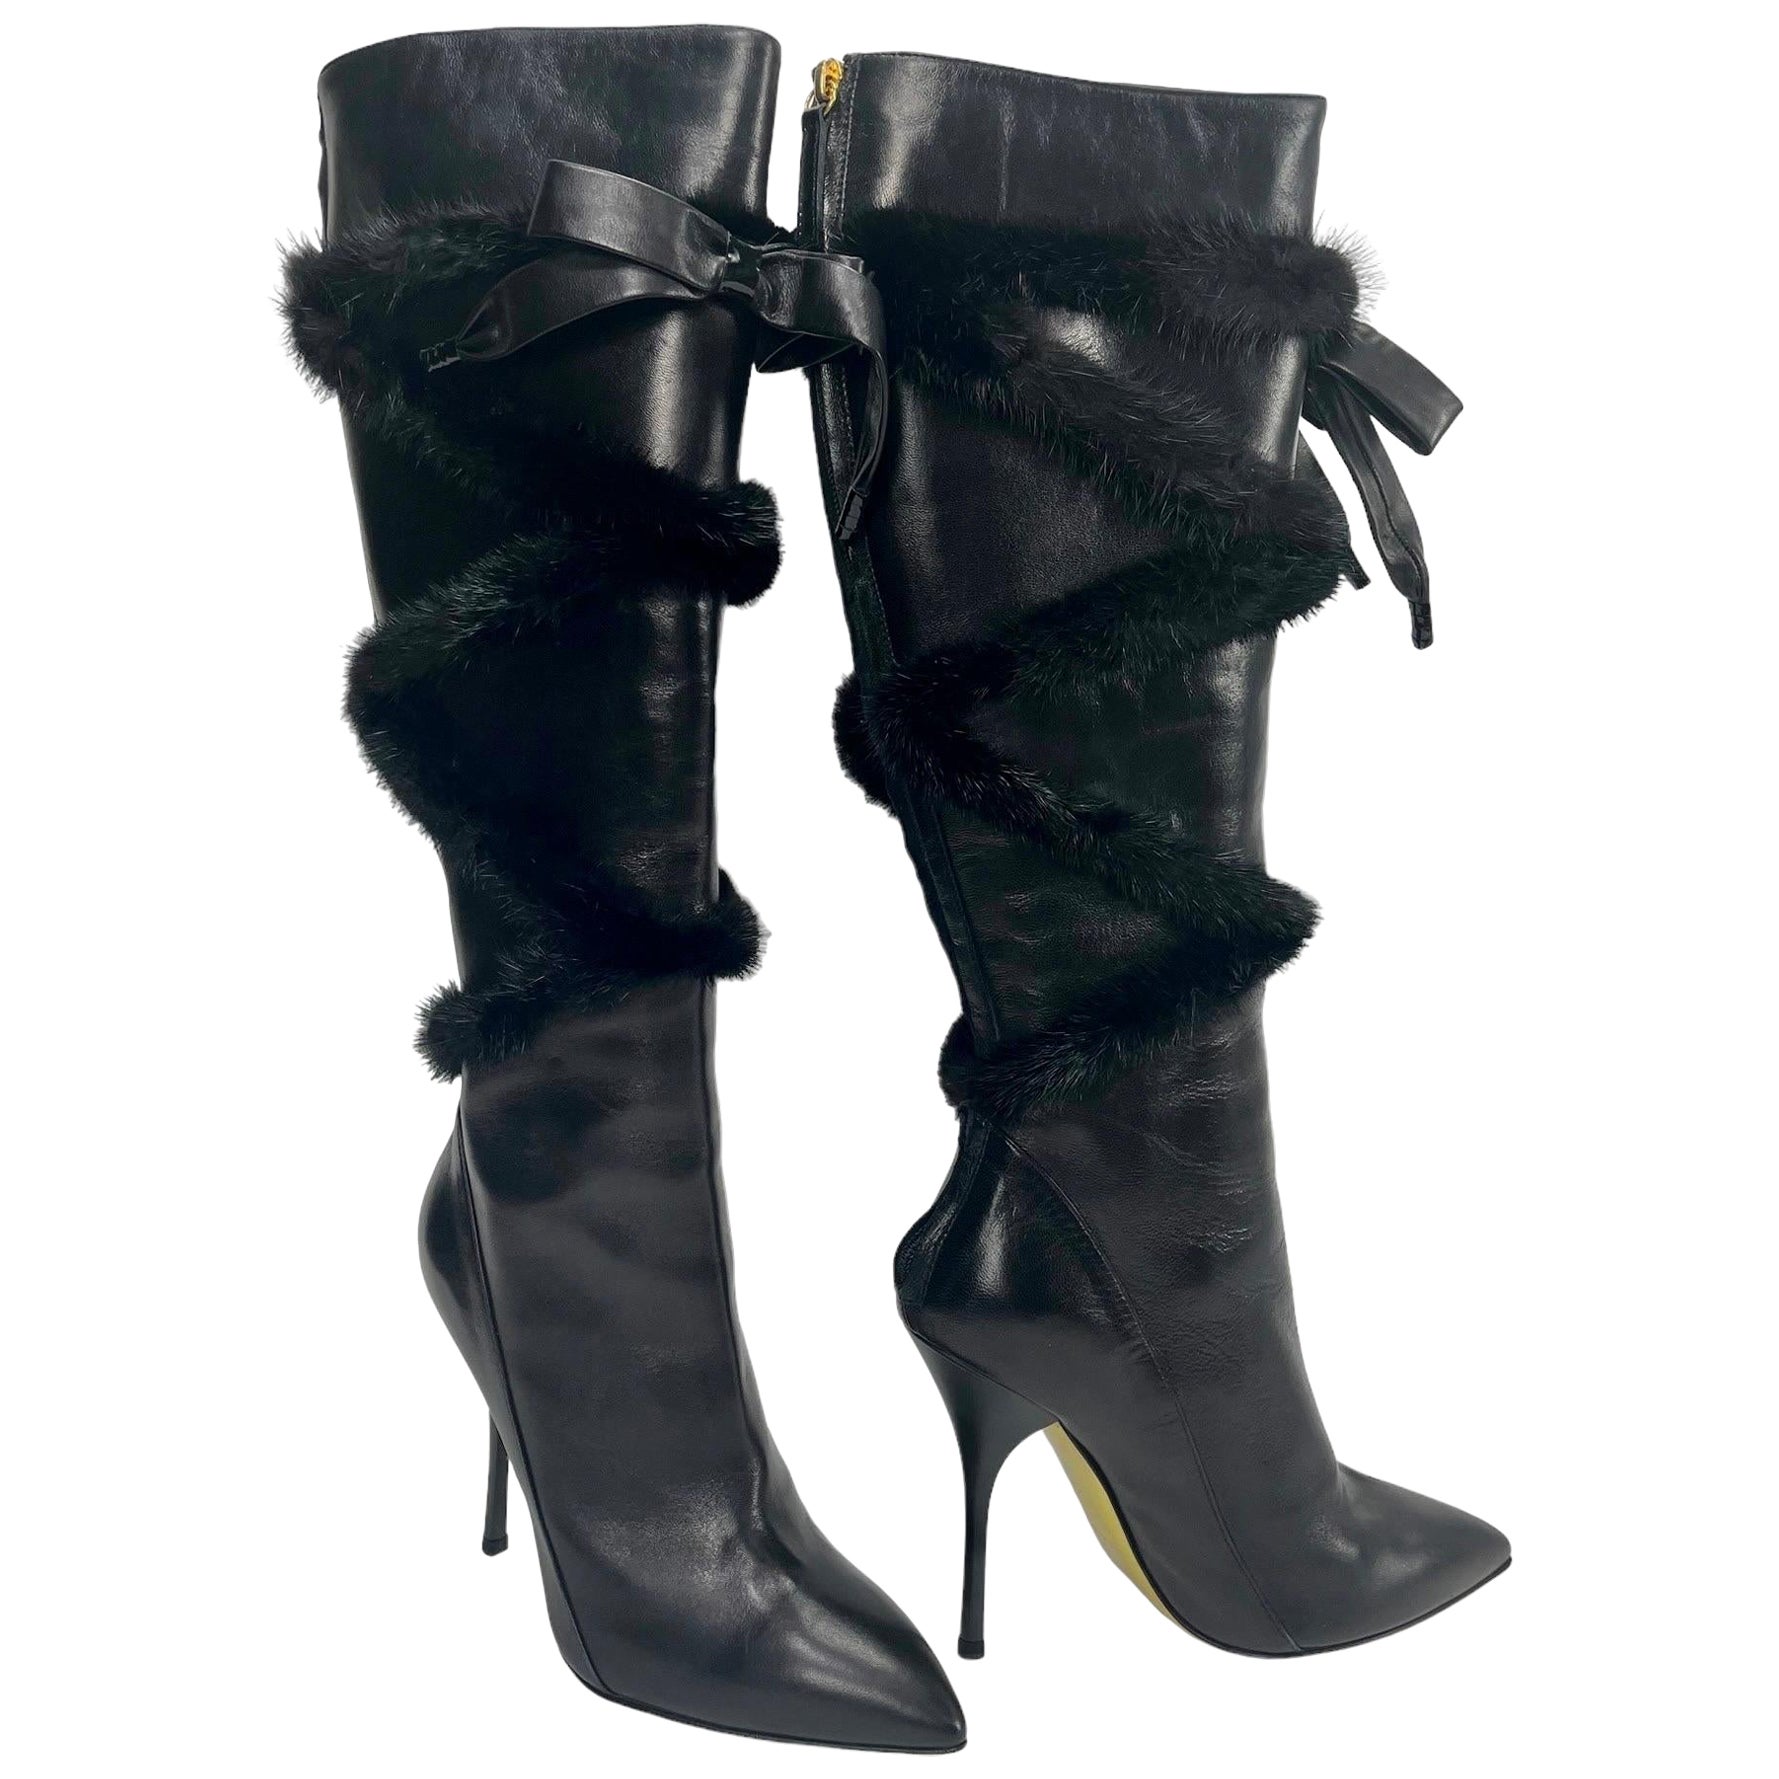 New Roberto Cavalli Black Leather Knee High Boots with Mink Fur It. 37 - US 7 For Sale